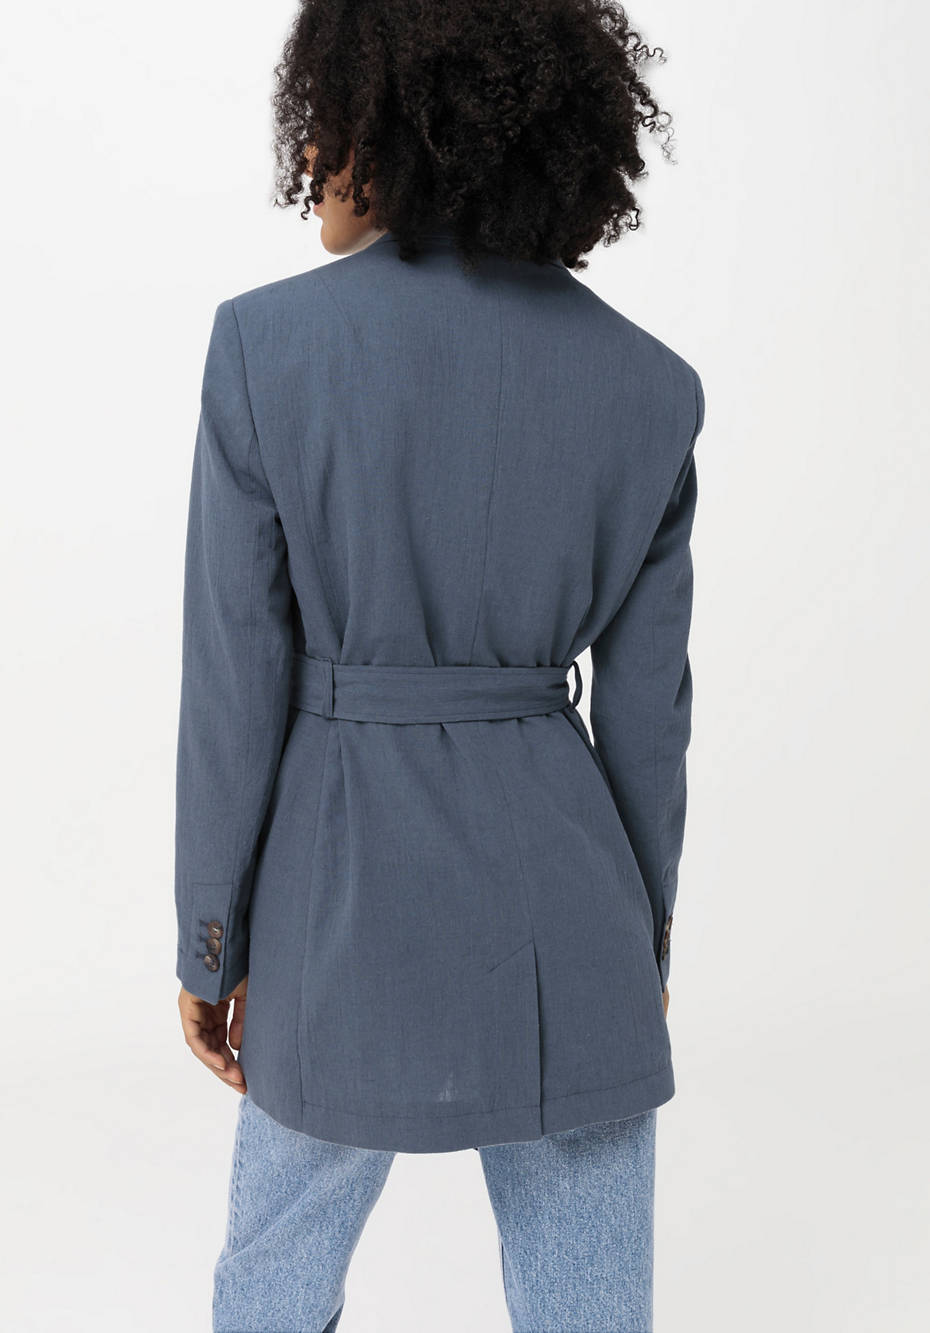 Blazer made of organic cotton with linen